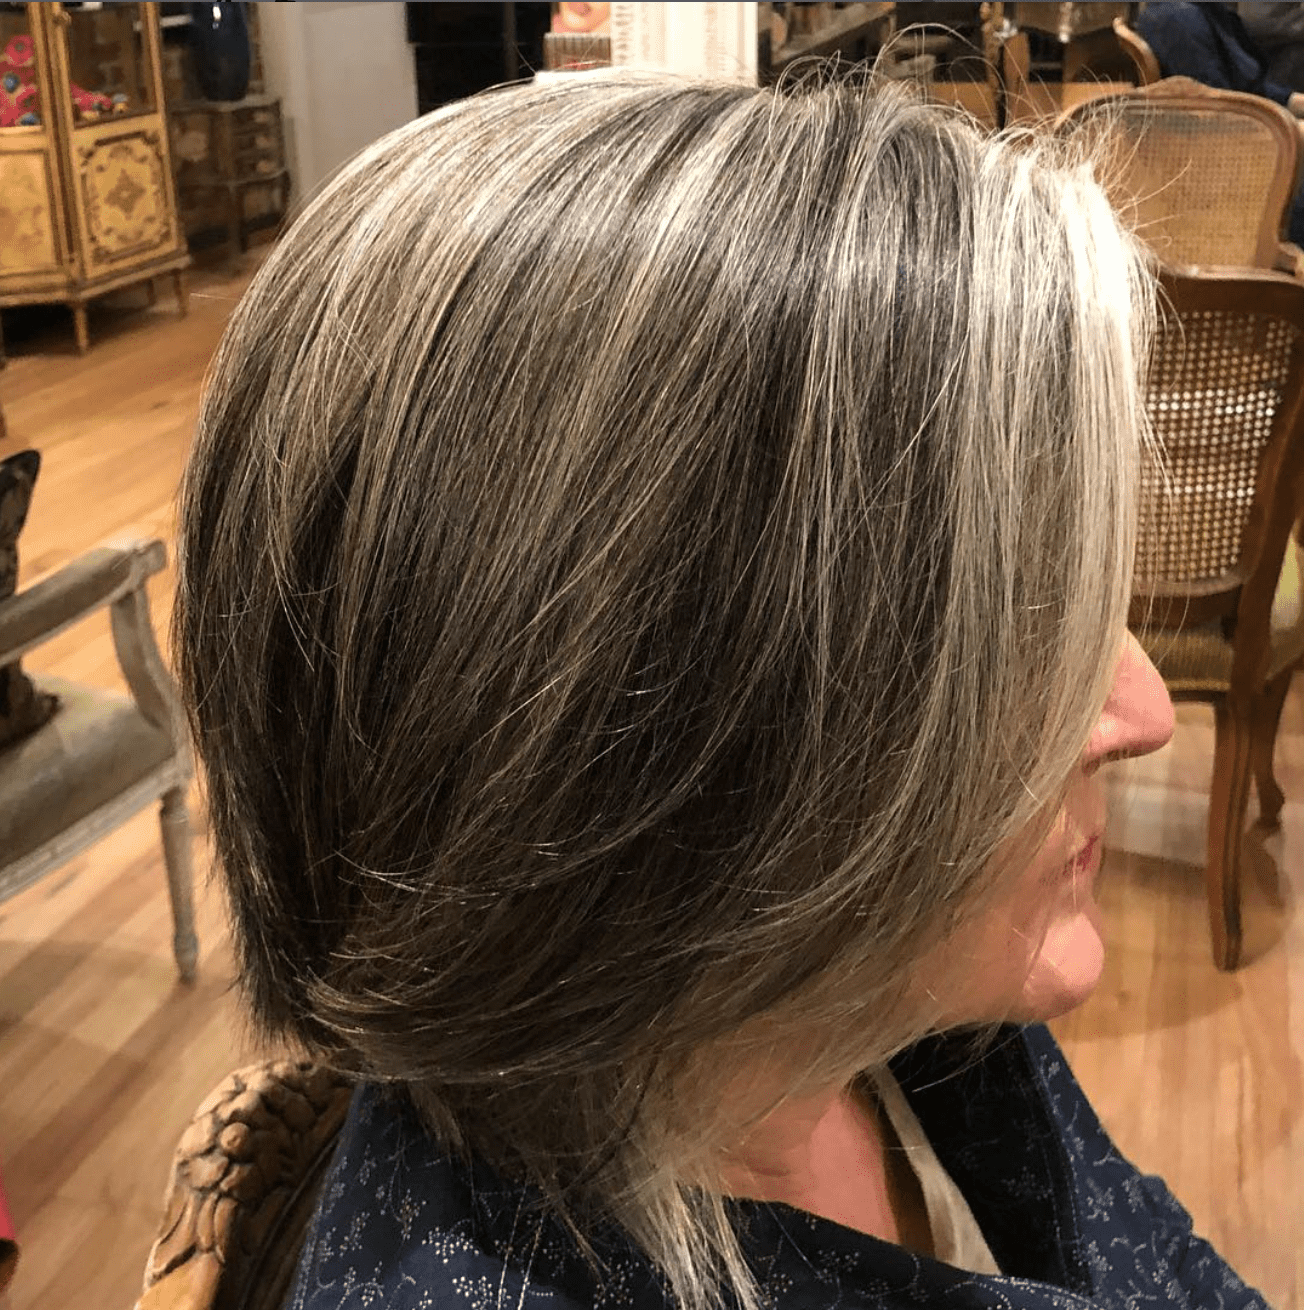 the side view of a woman growing out gray hair with added highlights